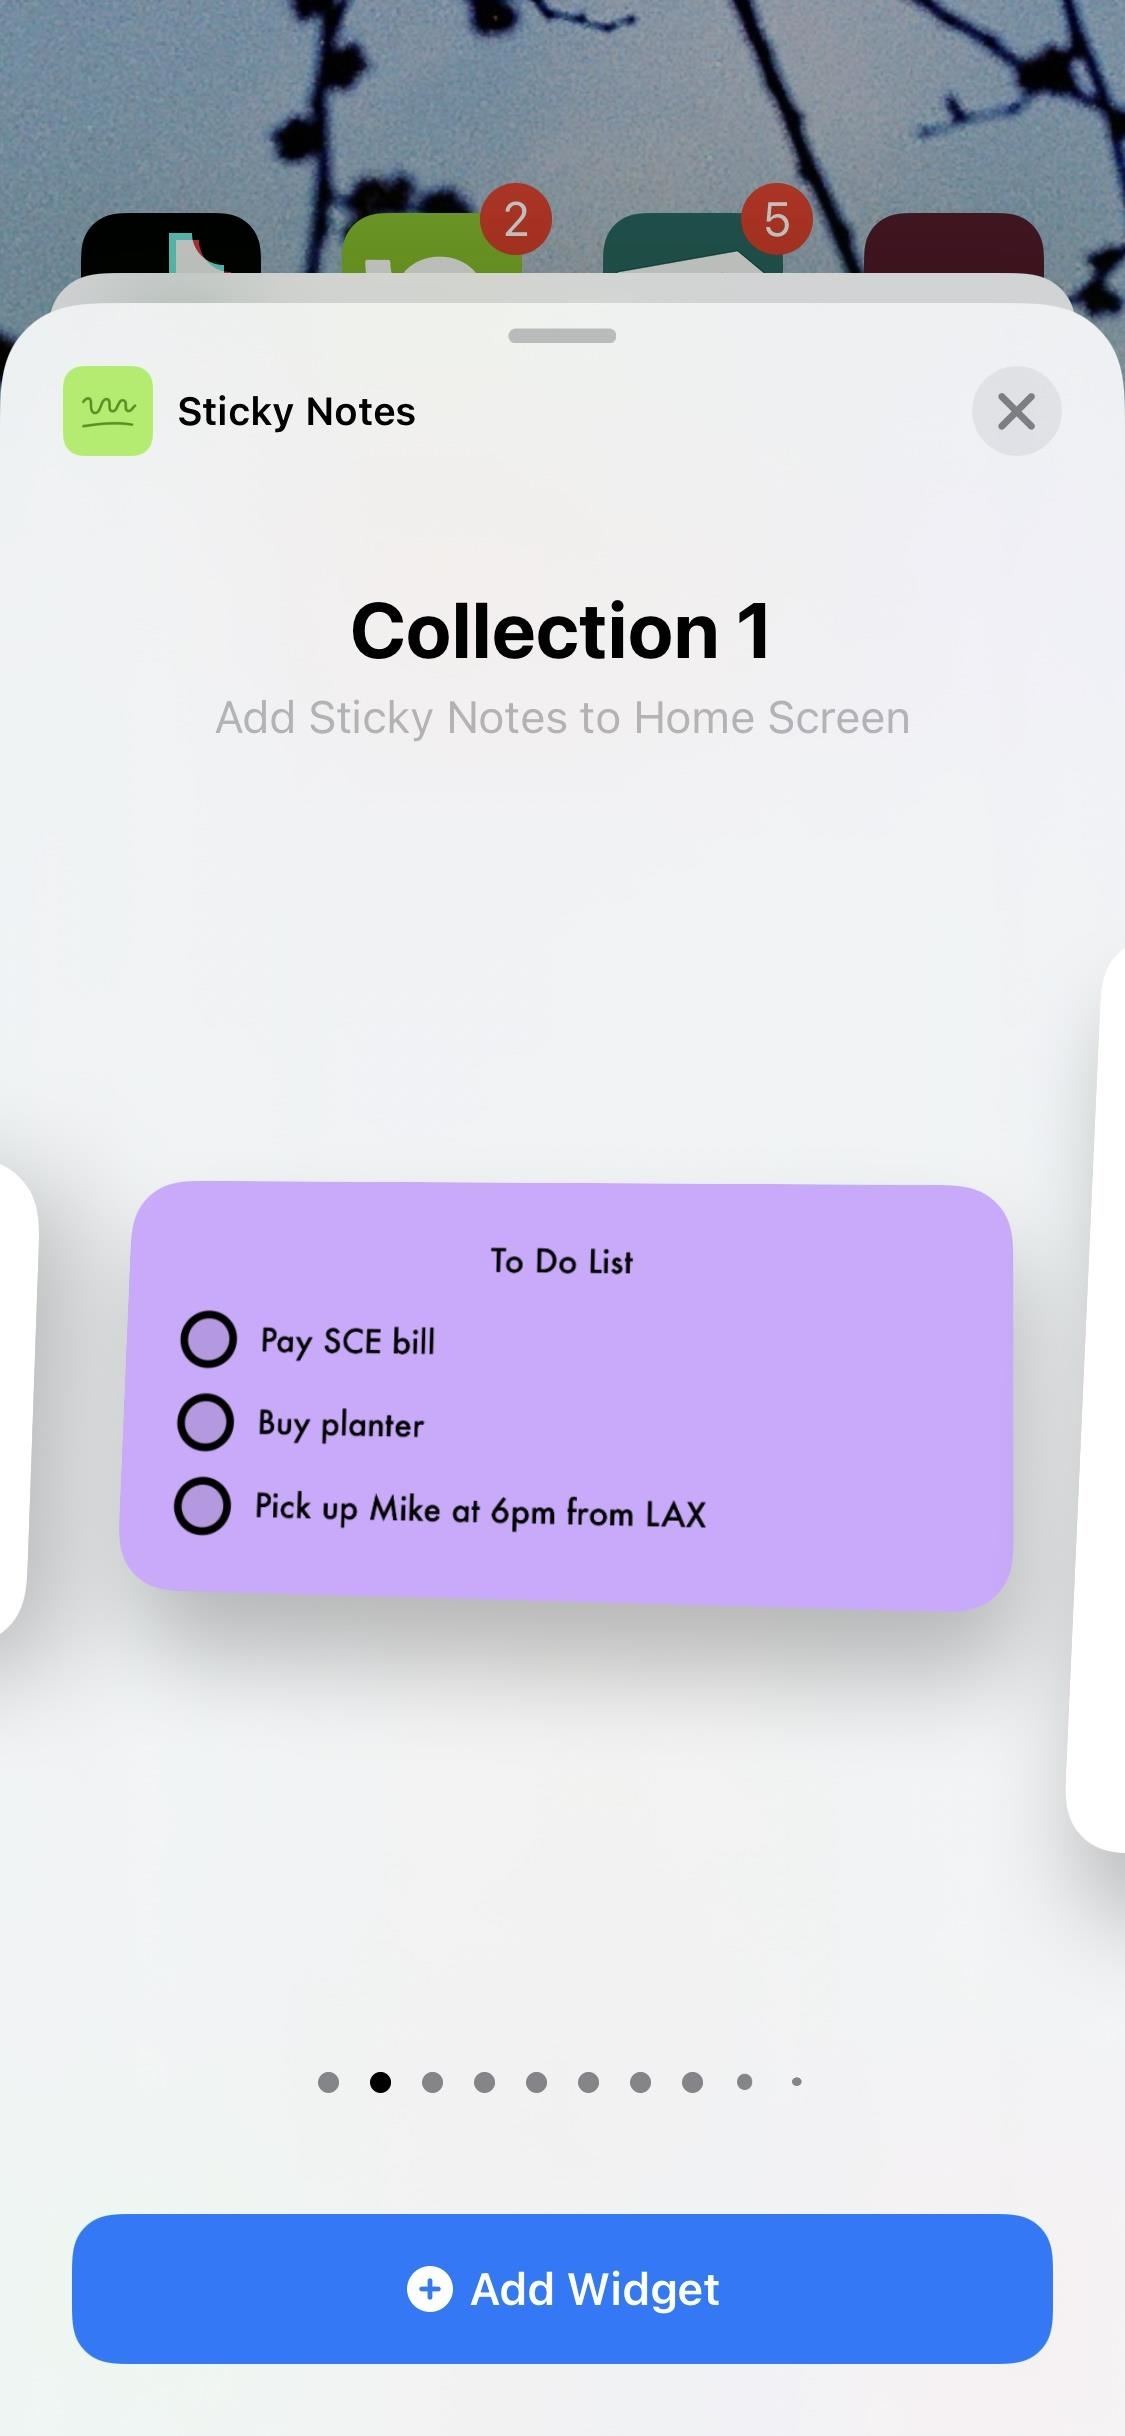 The Notes Widget Sucks — So Here Are 4 Better Ones for More Useful Sticky Notes on Your Home Screen